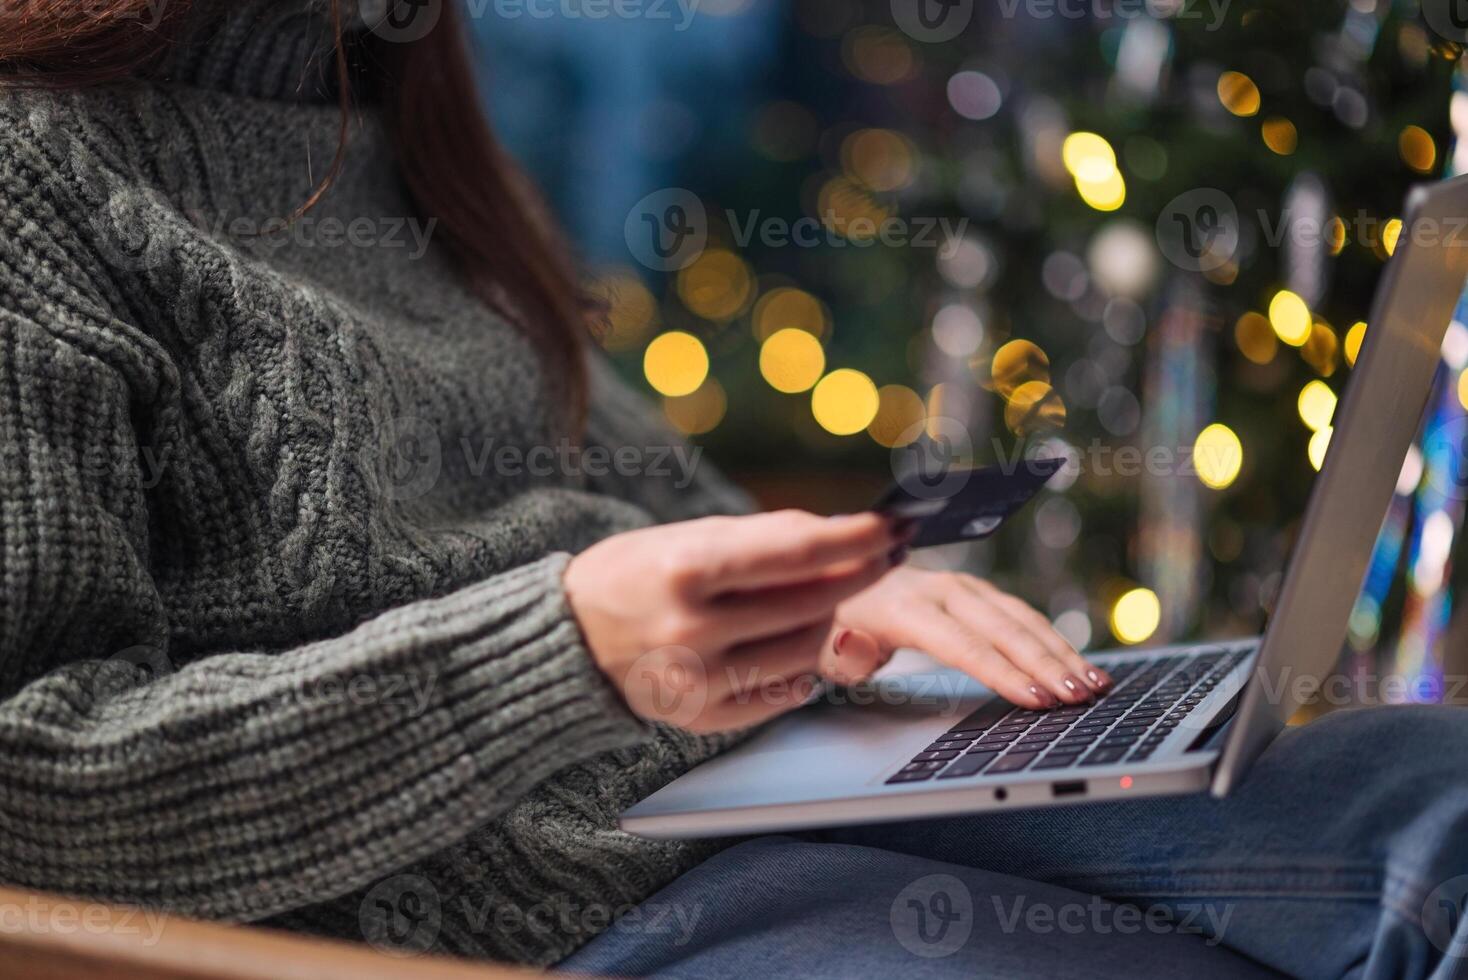 Christmas online shopping, sales and discounts promotions during winter holidays, online shopping at home. Female hands on the laptop with credit card and blurred bokeh lights photo